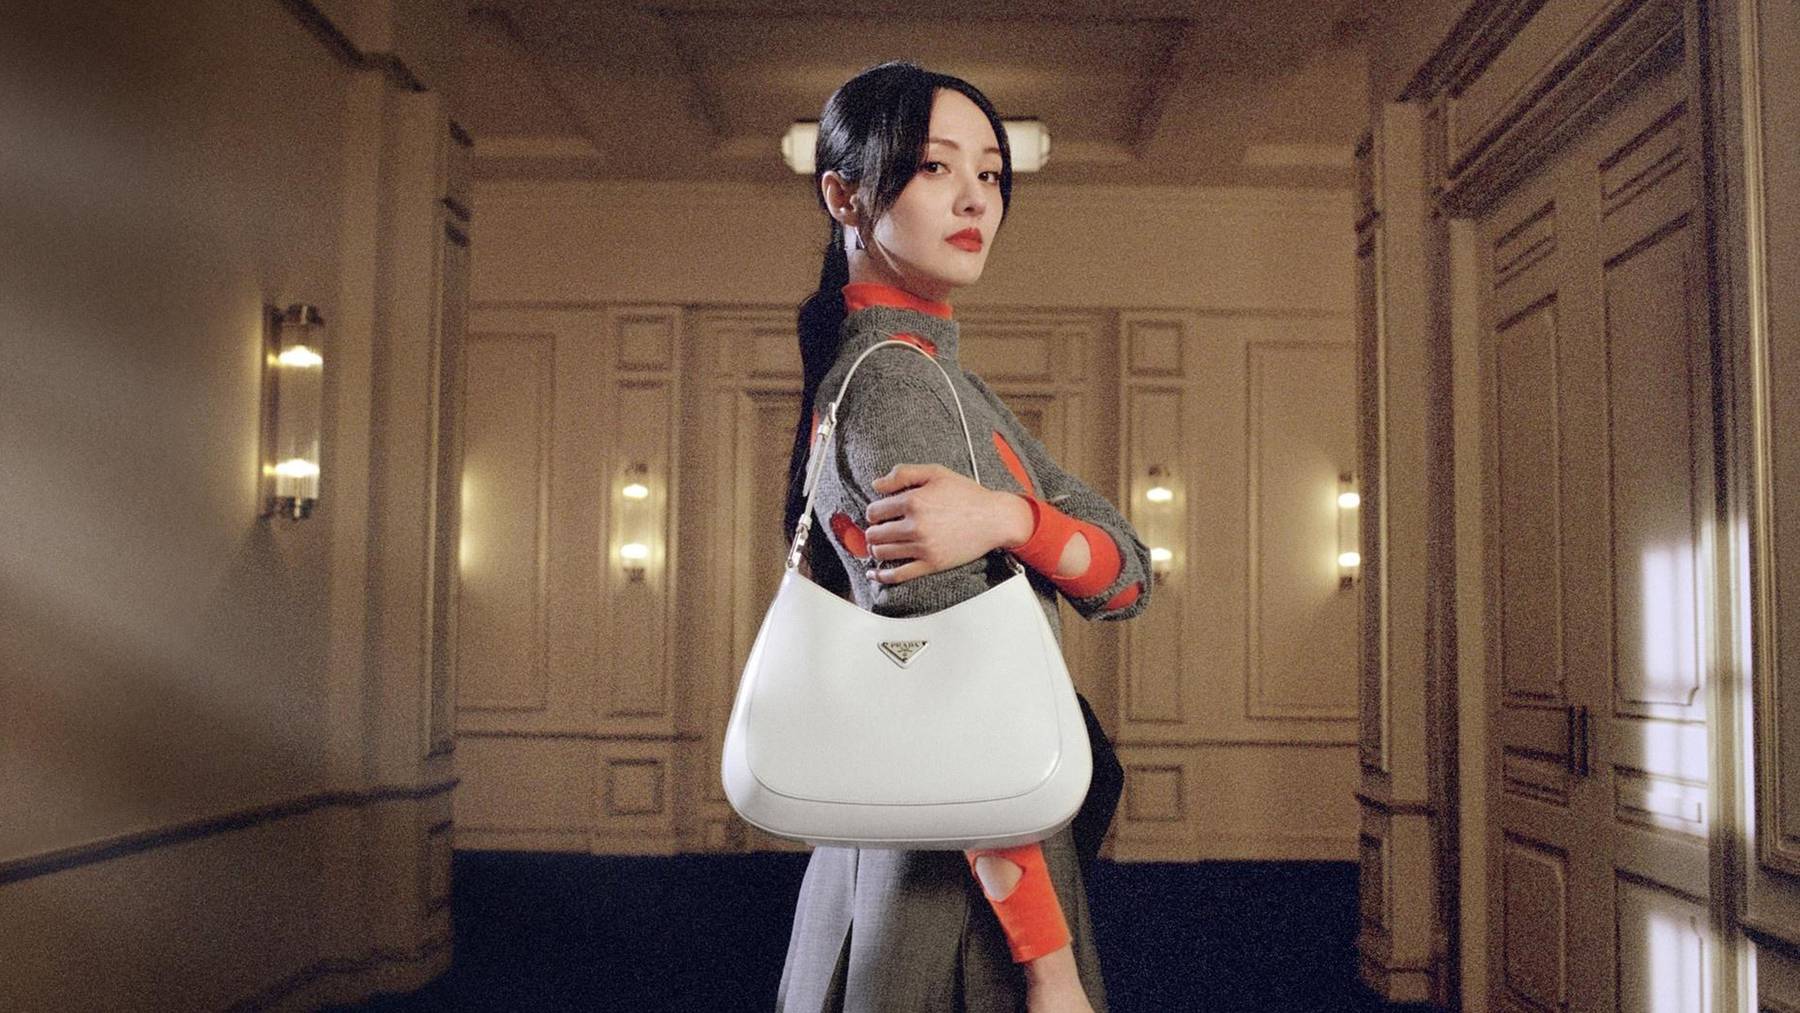 Actress Zheng Shuang in Prada's latest Chinese New Year campaign.